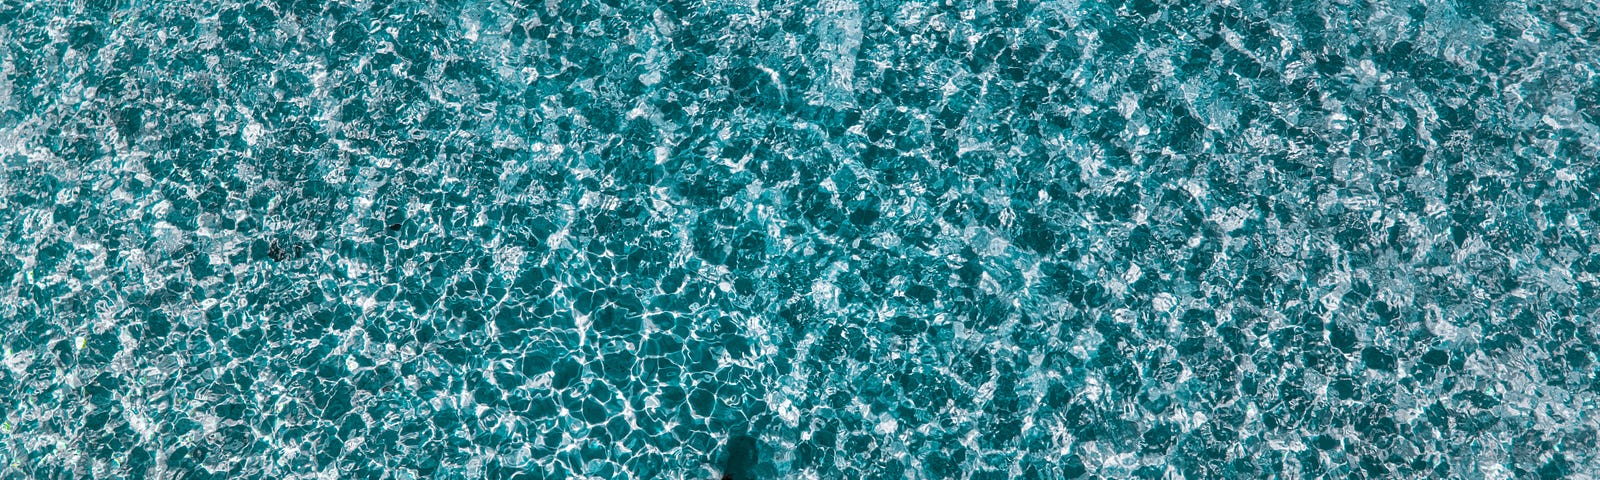 Woman in a bikini floating in the middle of a turquoise sea that looks like a mosaic.